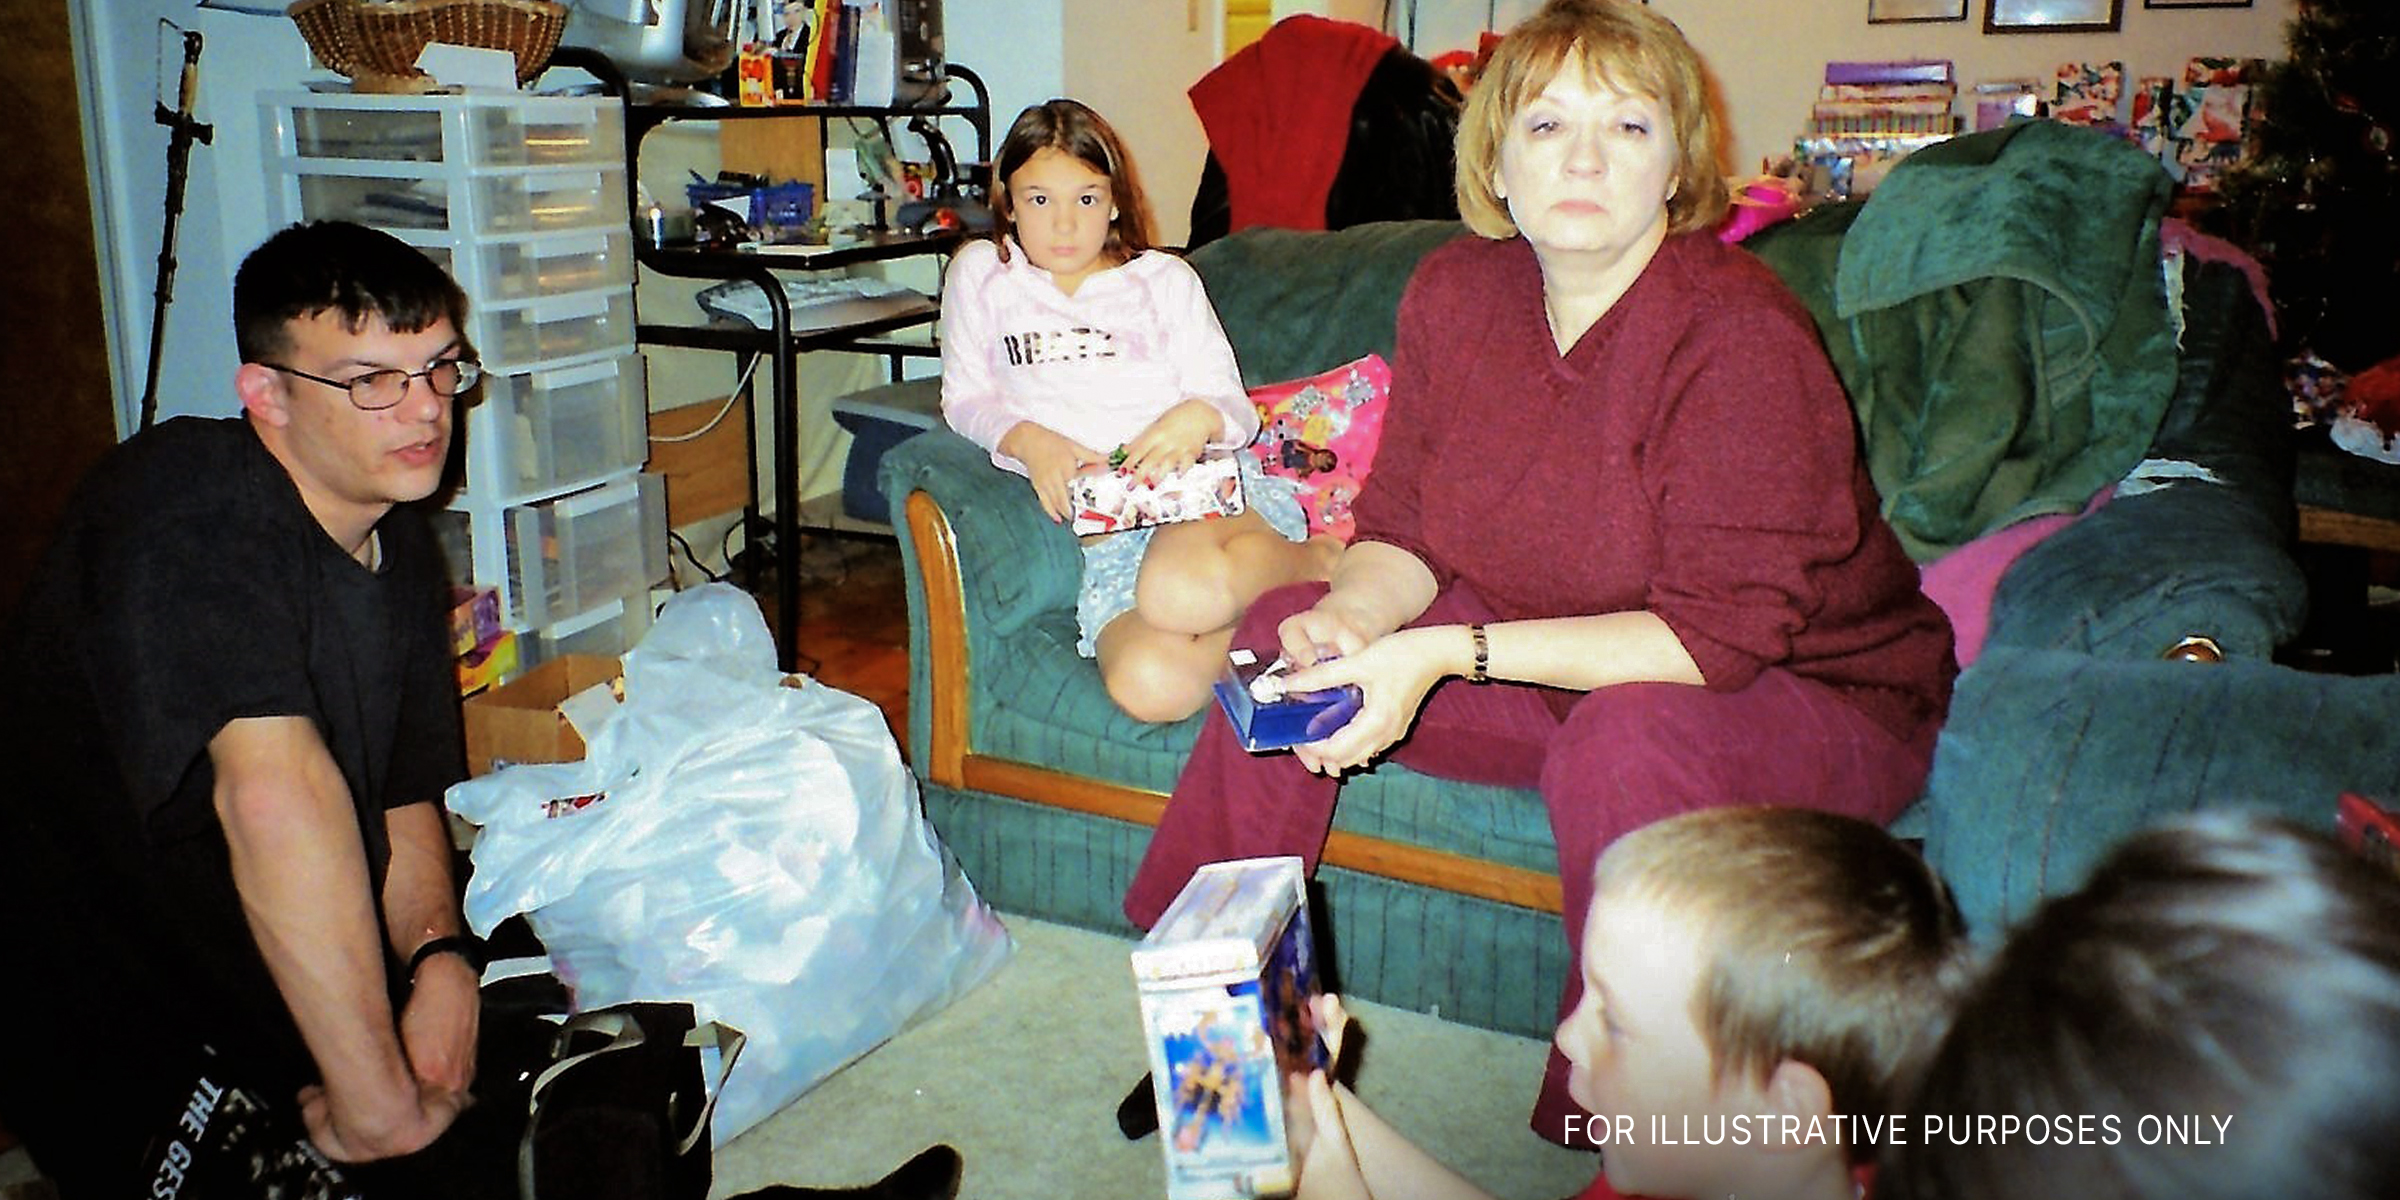 An elderly woman and her son watching their children open Christmas presents | Source: flickr.com/Stabbur's Master/CC BY-SA 2.0